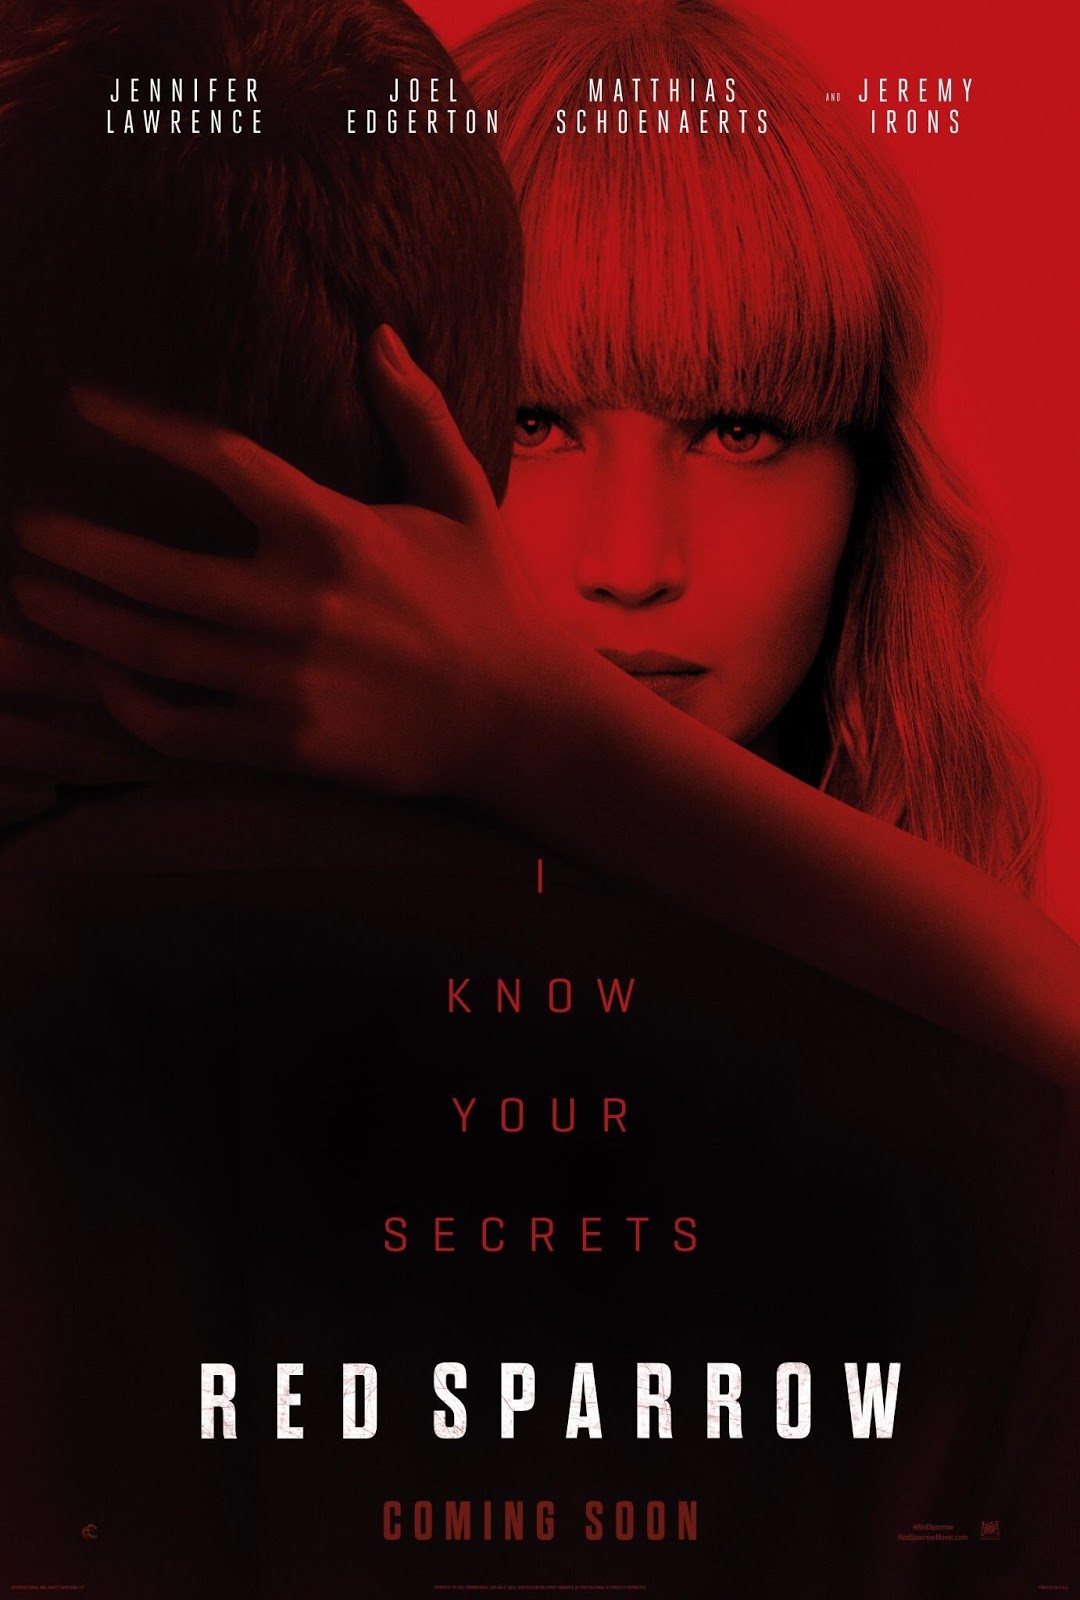 Sammenligne Før petulance Fred Said: MOVIES: Review of RED SPARROW: Spy by Seduction